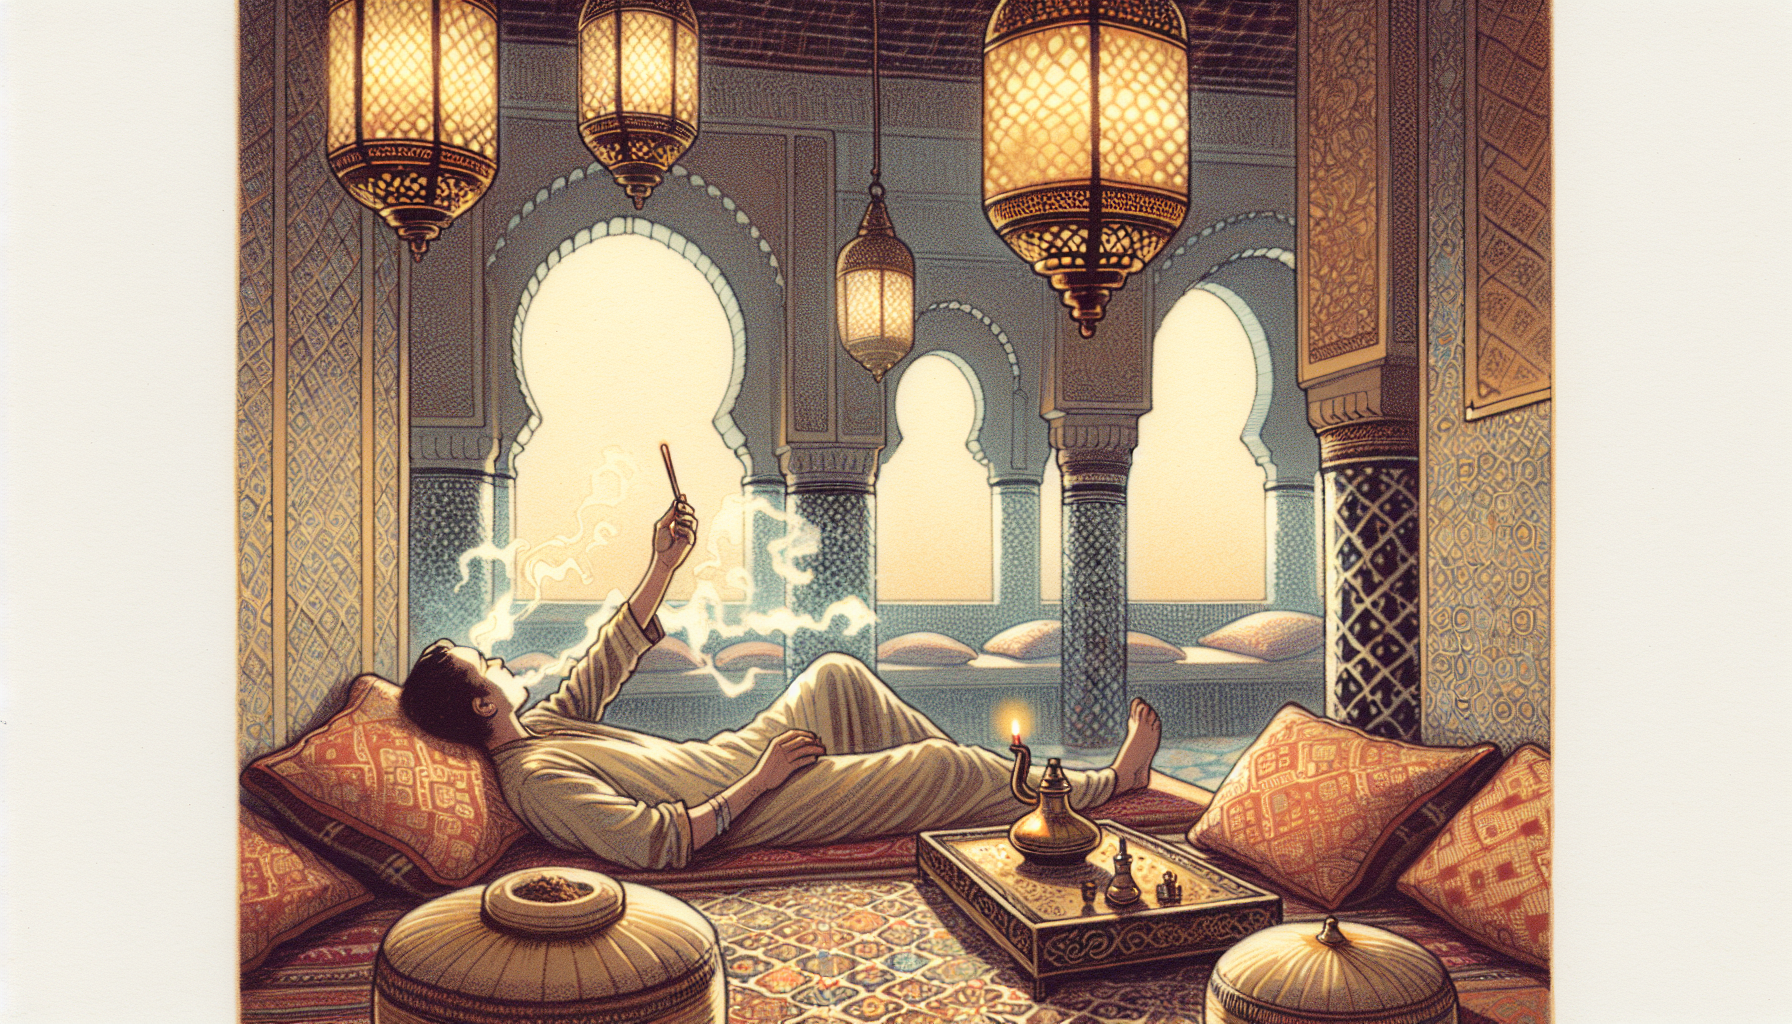 Illustration of a serene setting with a person enjoying Moroccan Habibi Hash